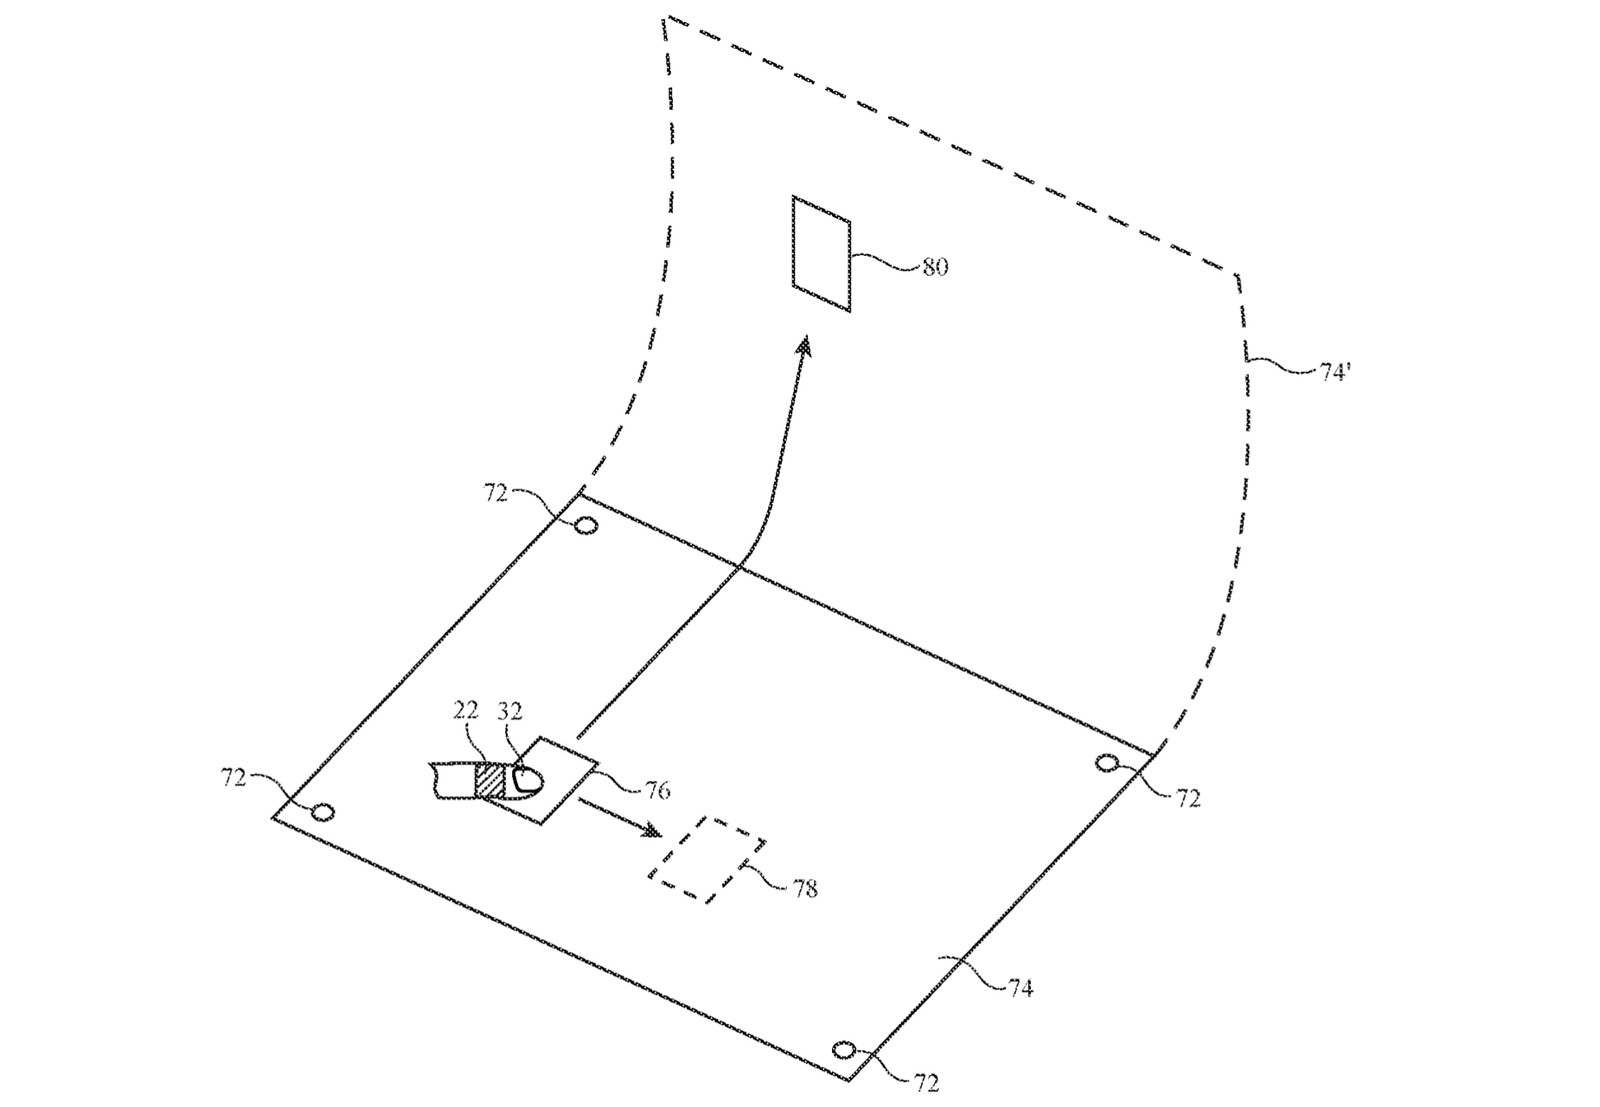 finger-mounted-device-patent-ar-applicat